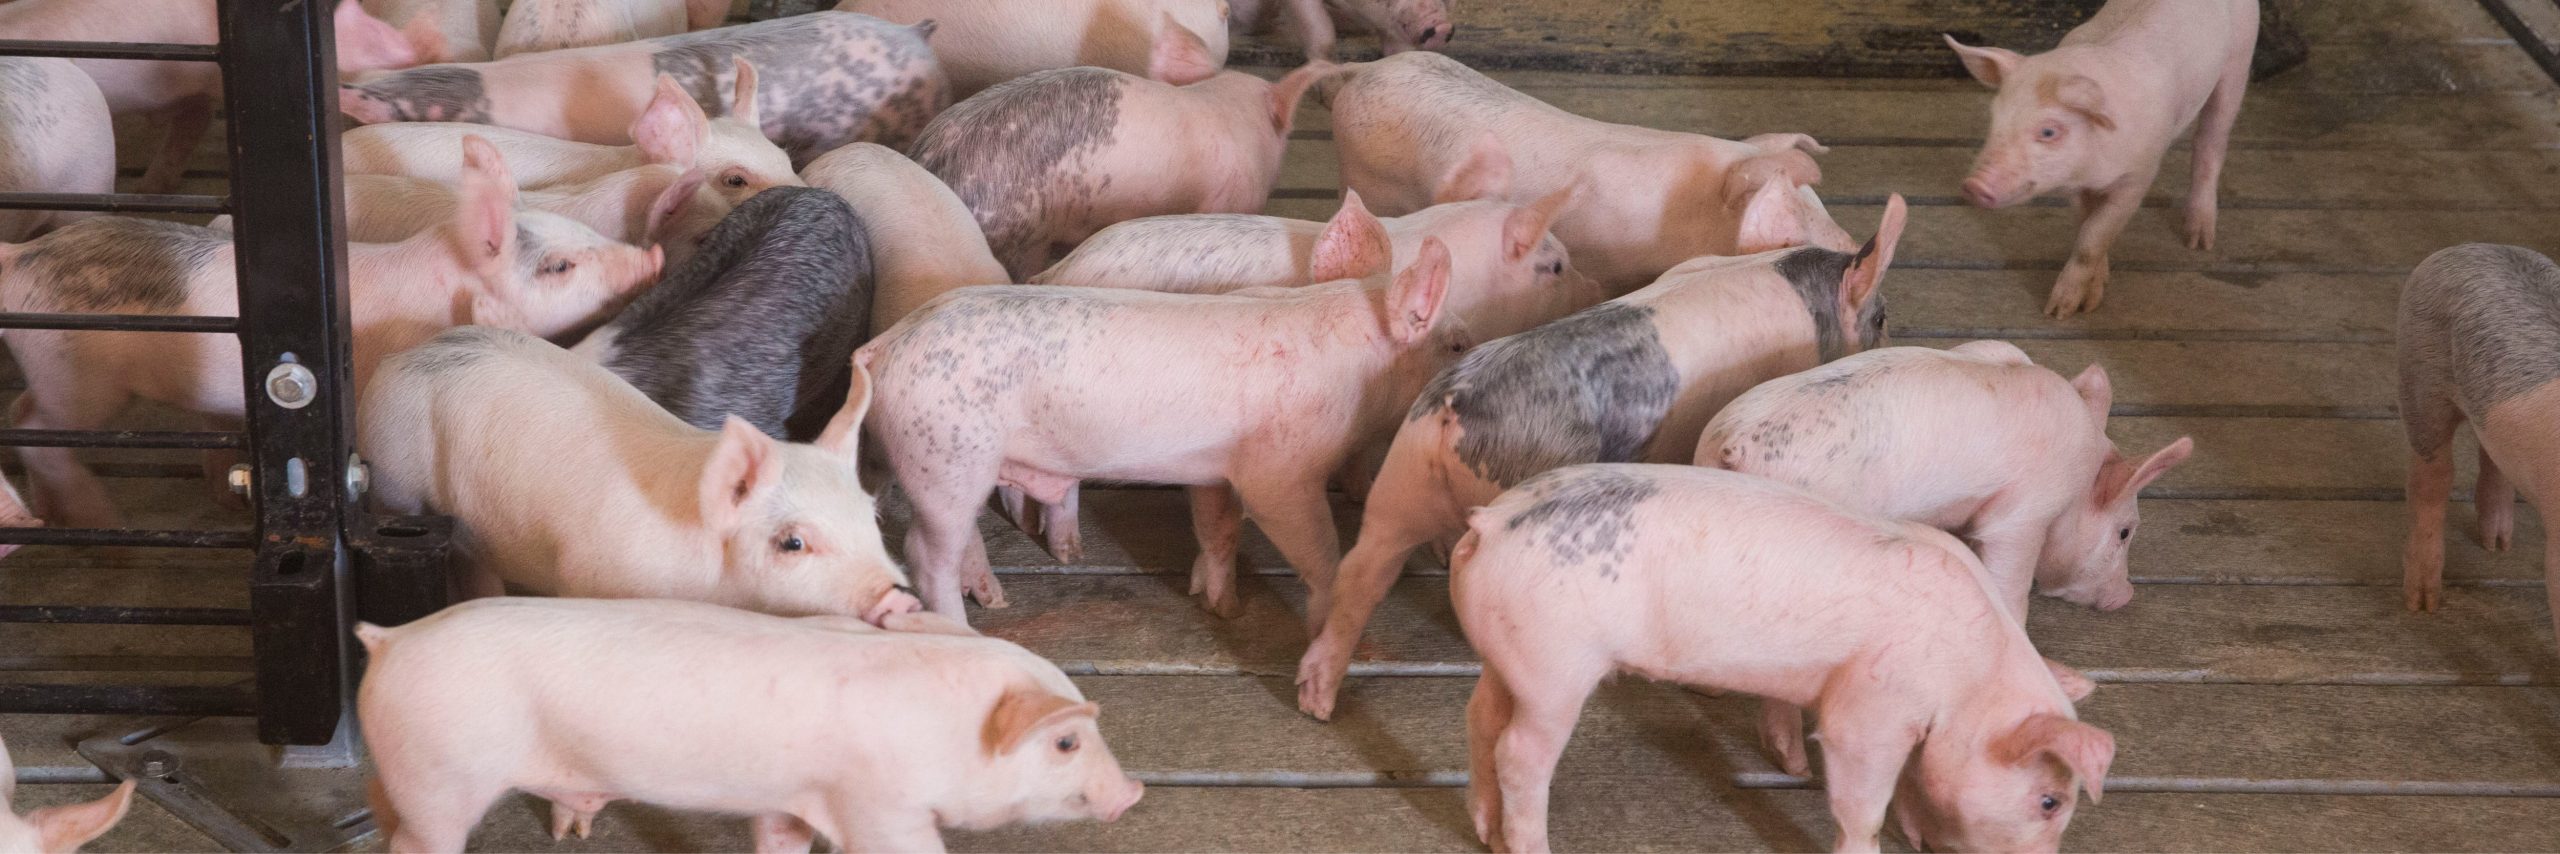 Addressing the PEOPLE factor in swine production